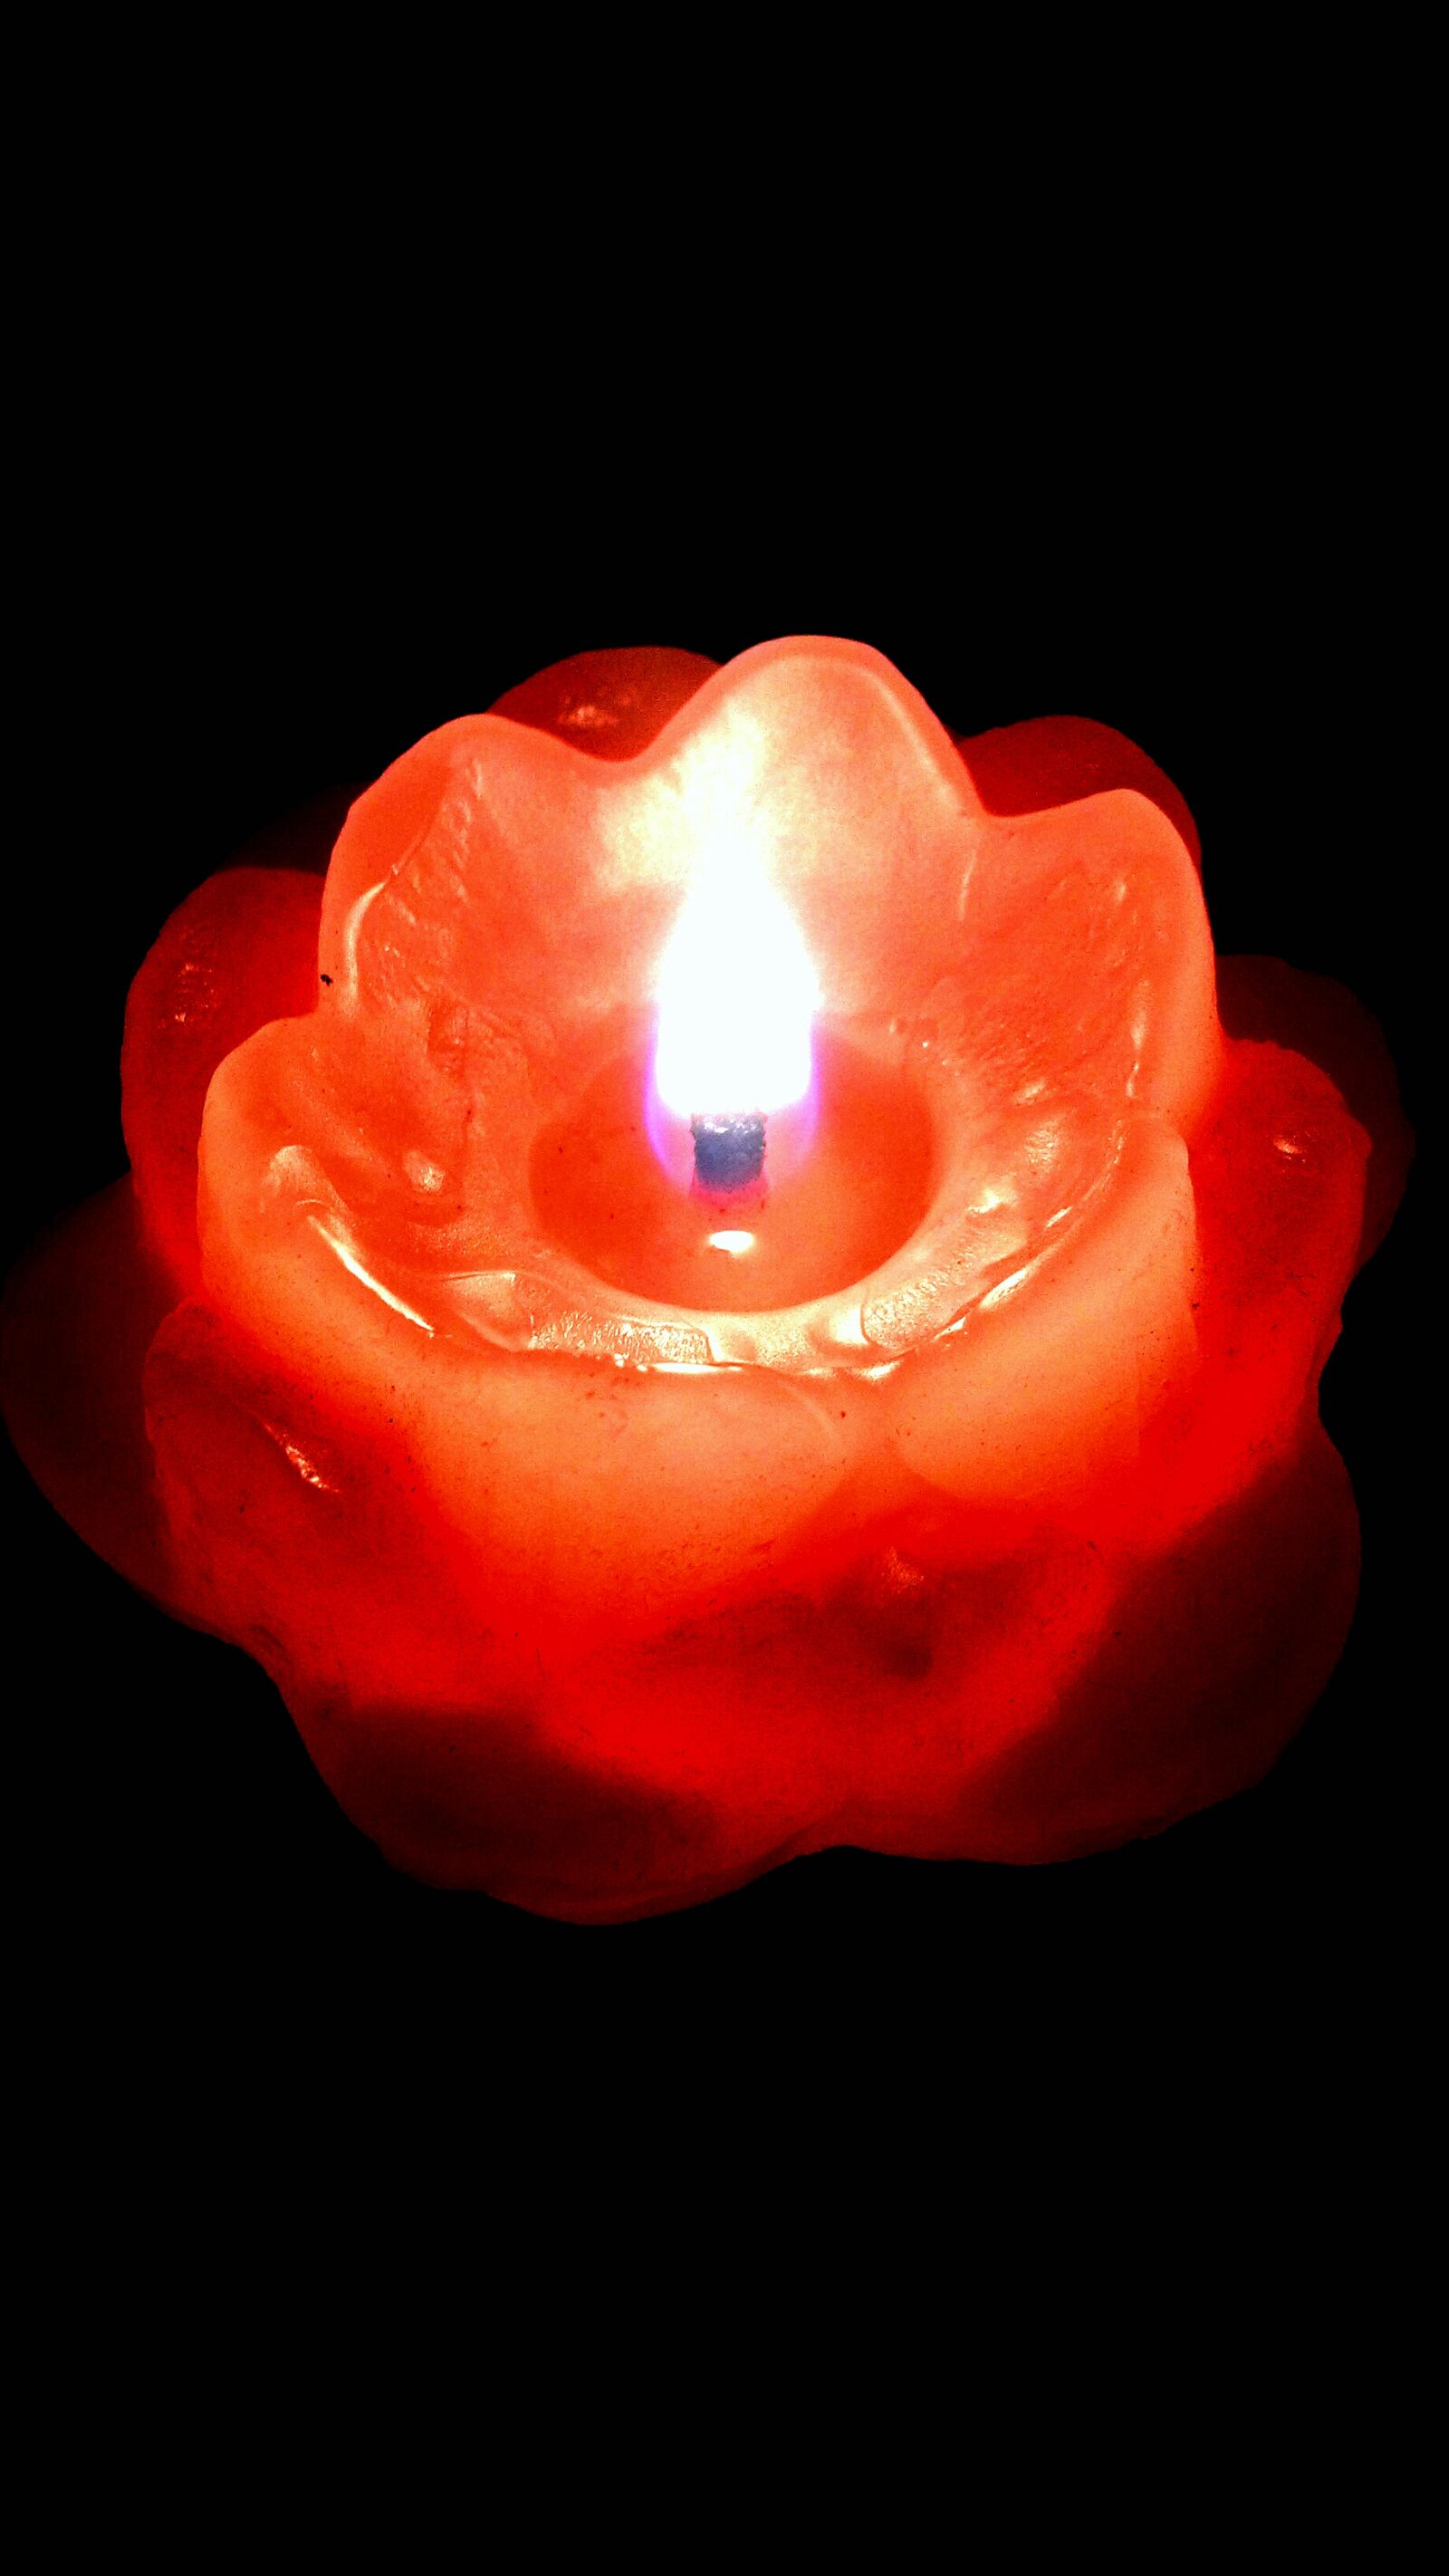 HUAWEI Y6 sample photo. Candle, candlelight photography